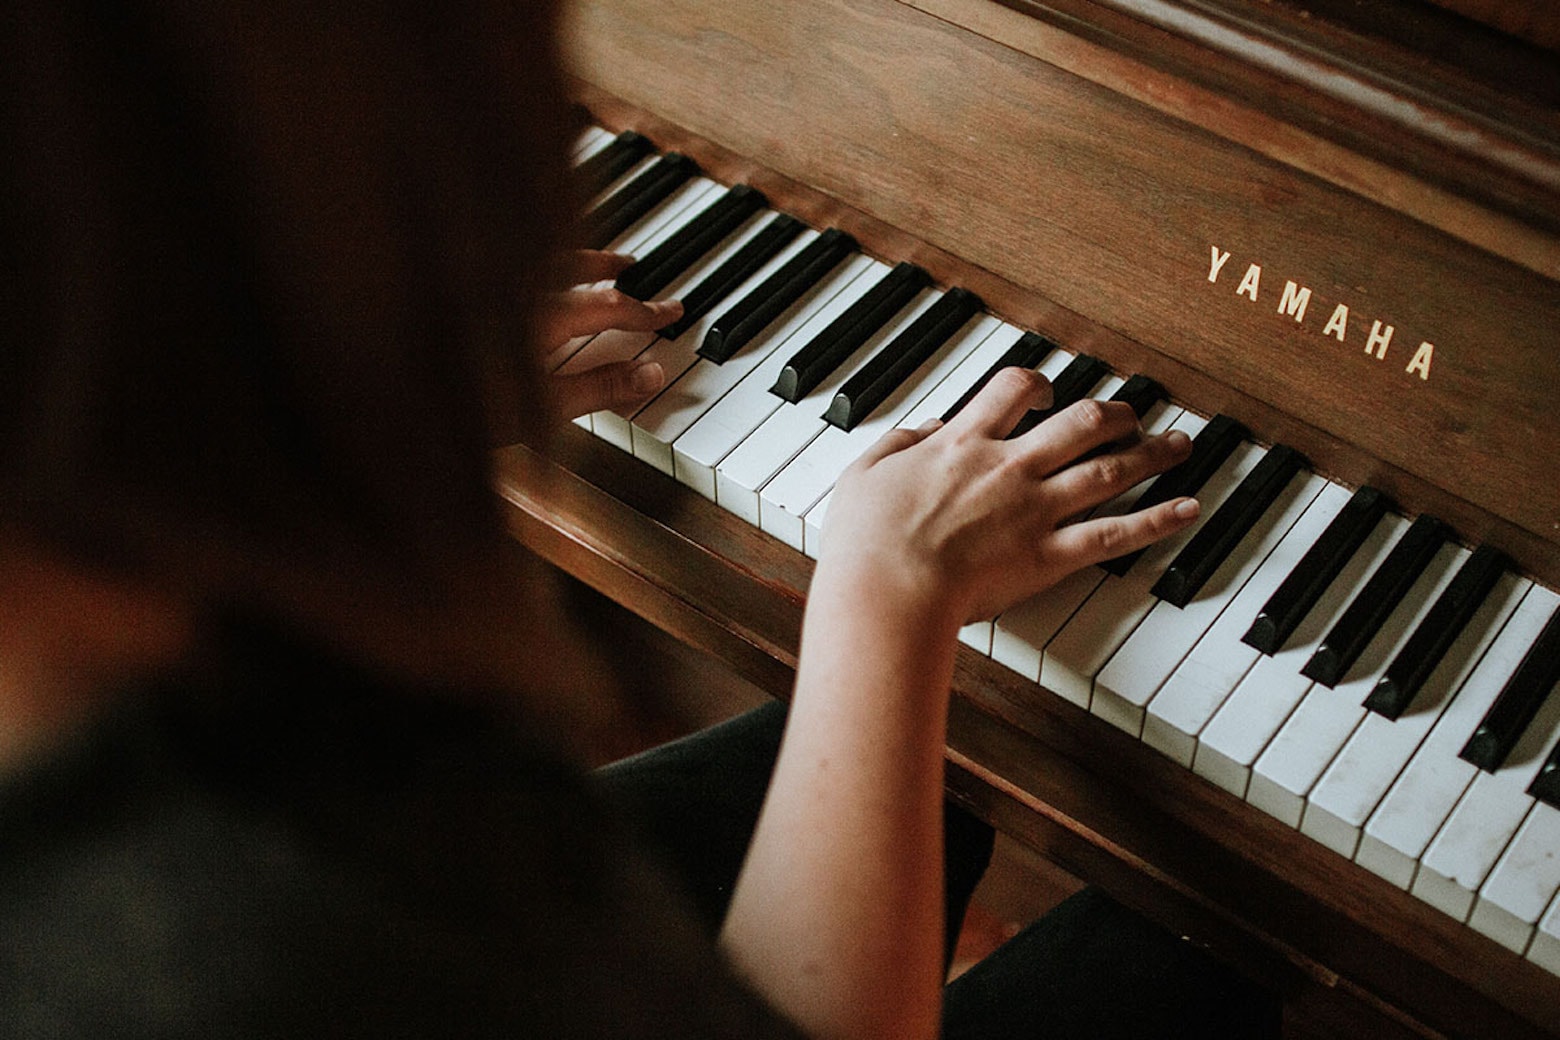 Learn to play piano and write music with this inexpensive training bundle